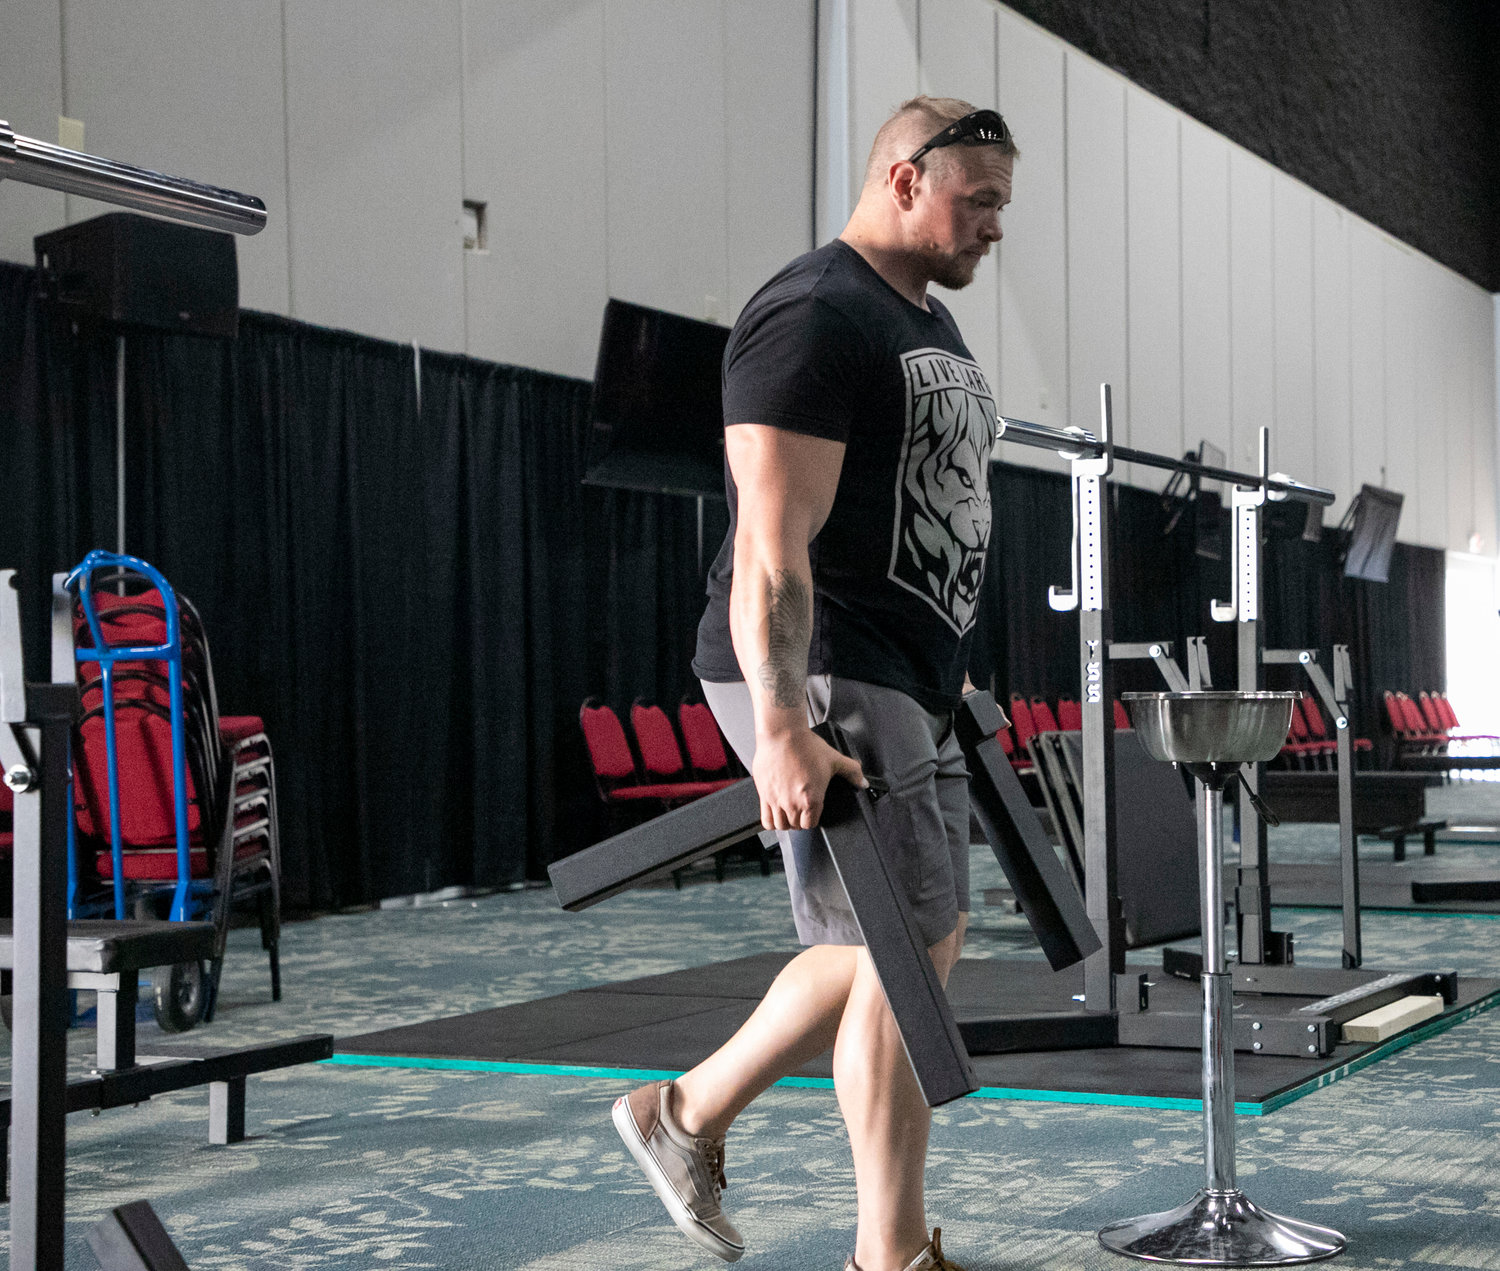 It was all hands on deck Wednesday to get the Orange Beach Event Center prepped to host the International Powerlifting World Championship meet this weekend.